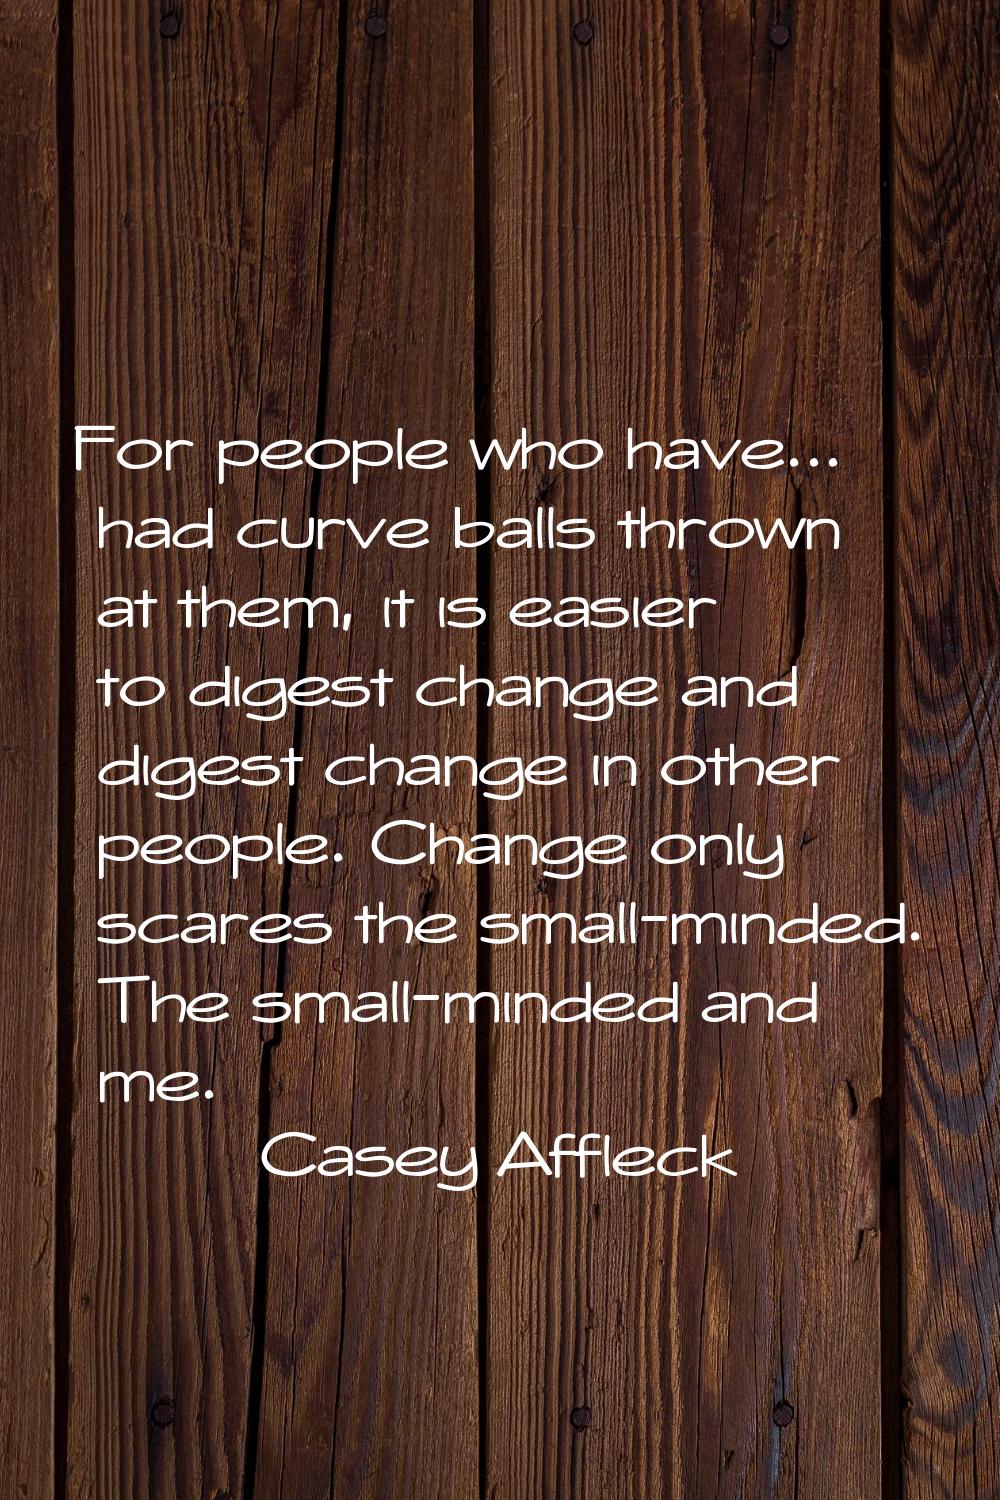 For people who have... had curve balls thrown at them, it is easier to digest change and digest cha